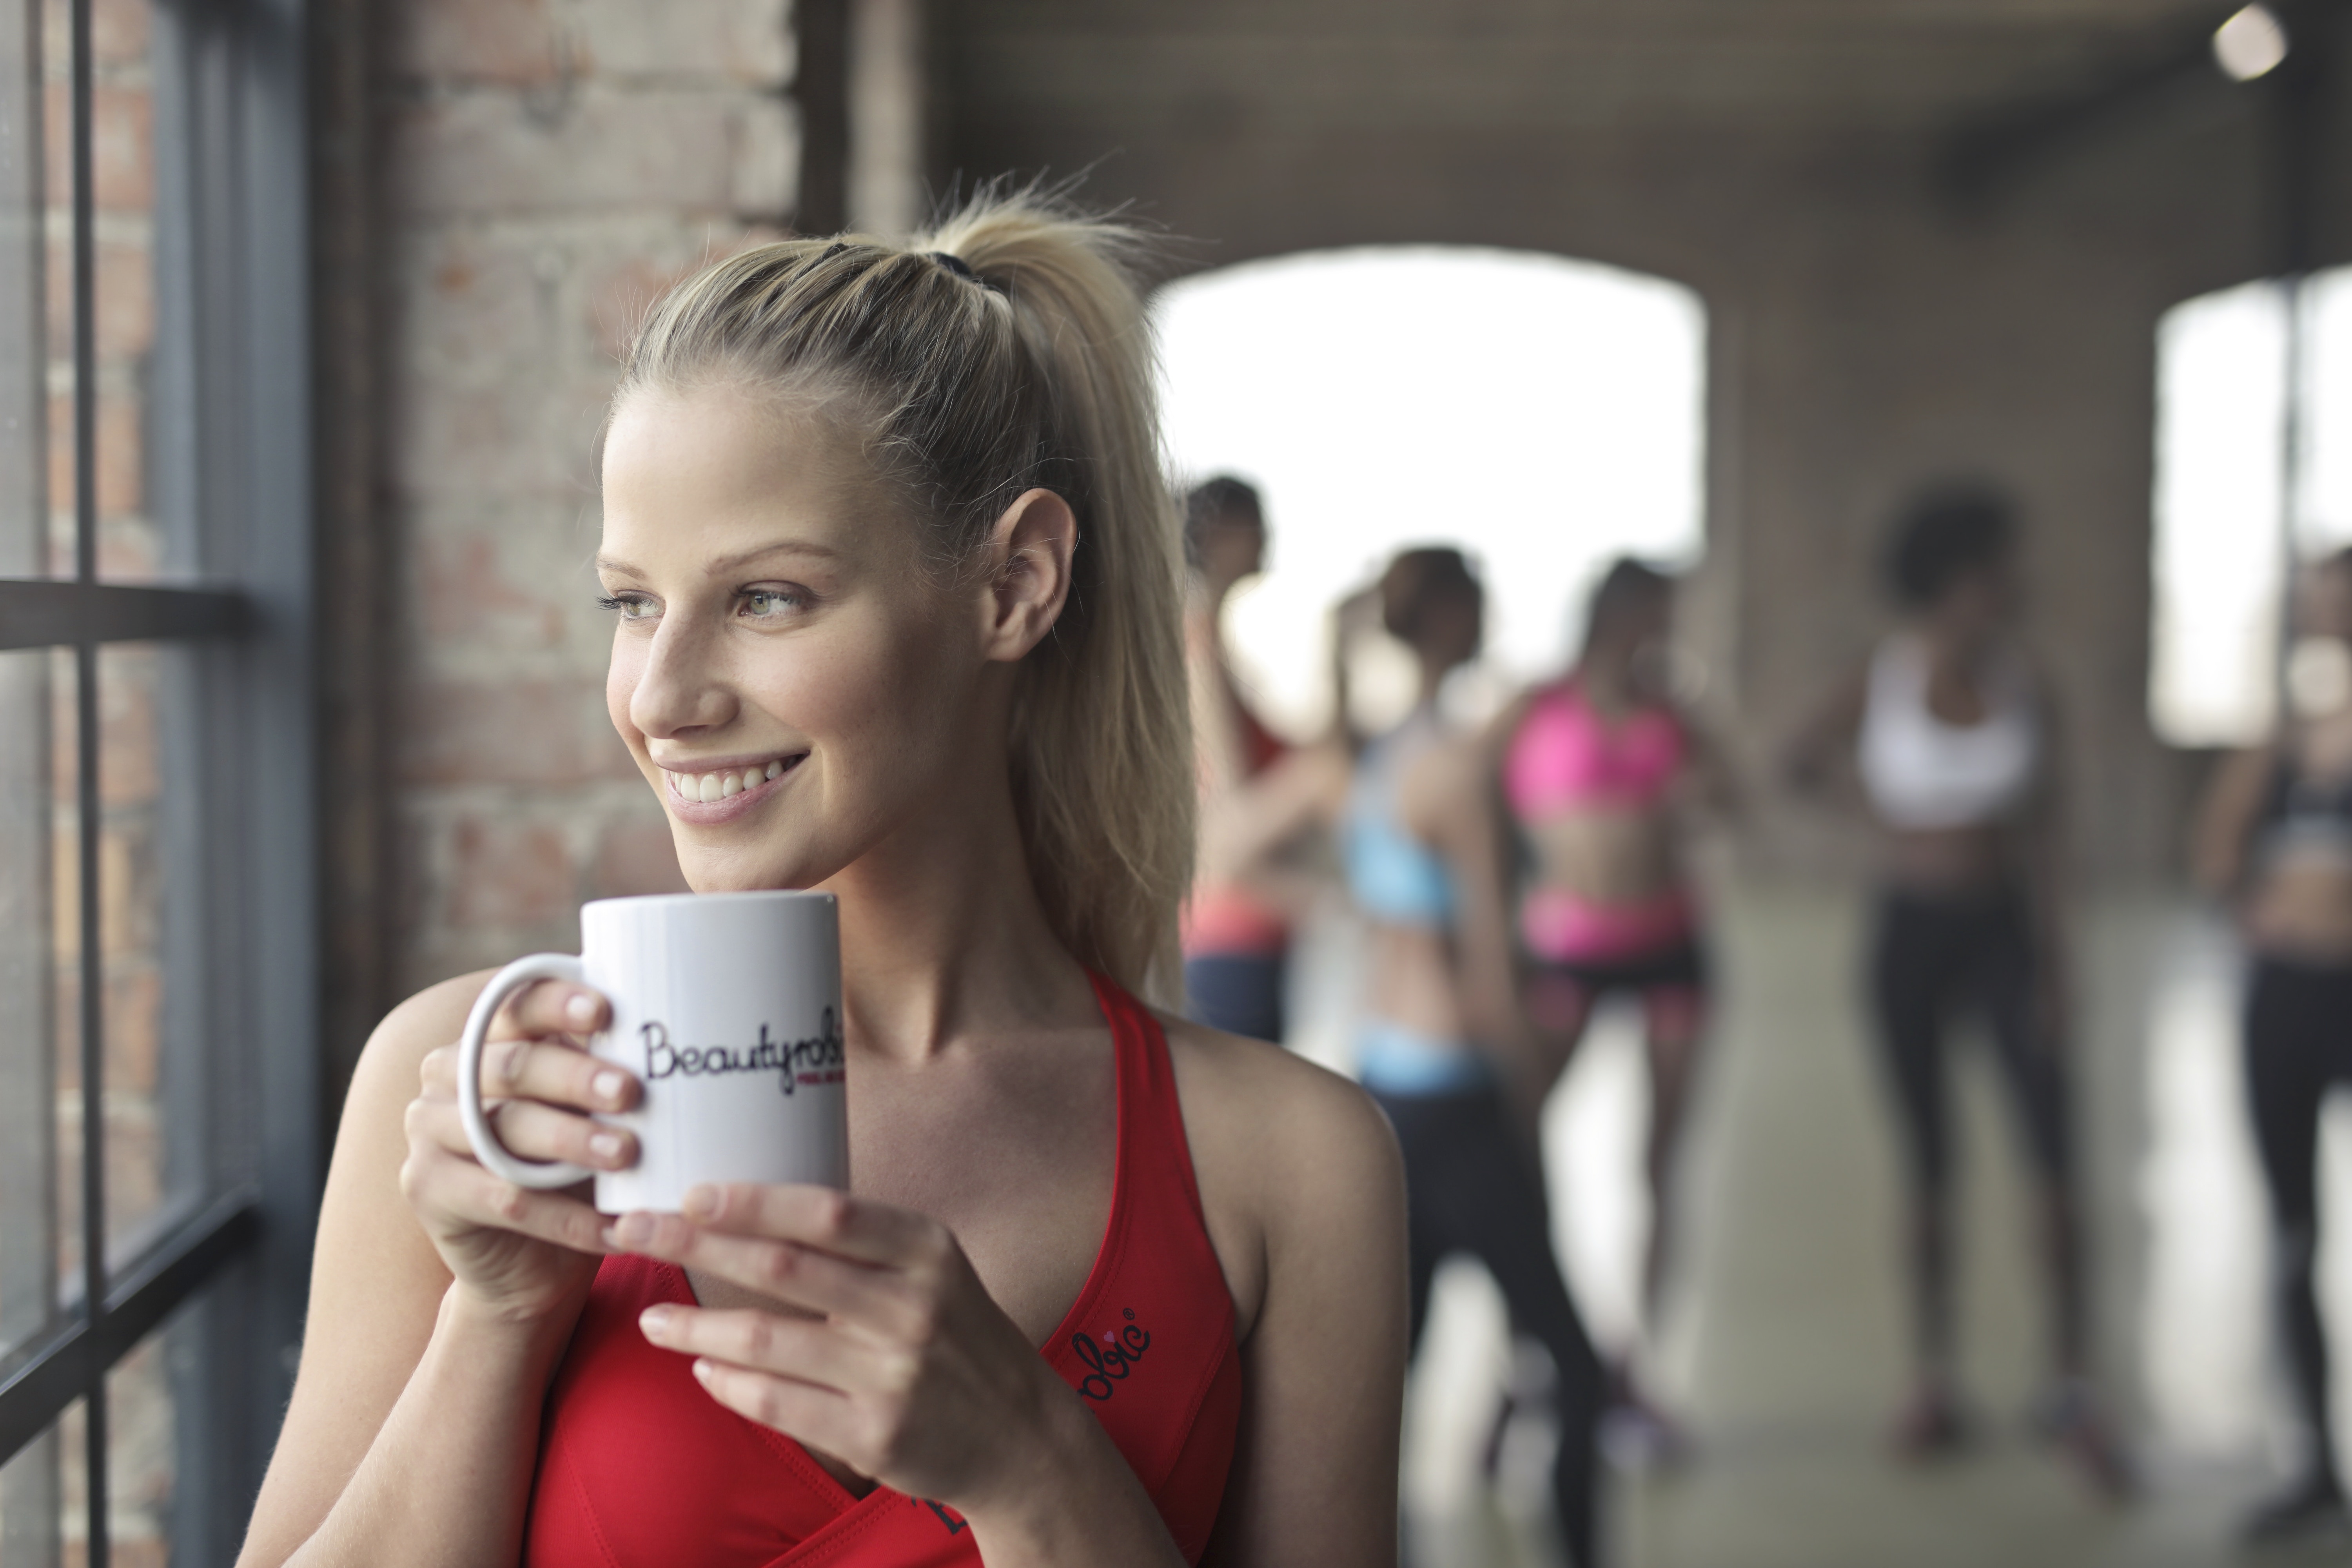 Women Model Ponytail Sportswear Blonde Black Hair Training Cup Smiling Depth Of Field Looking Out Wi 6000x4000